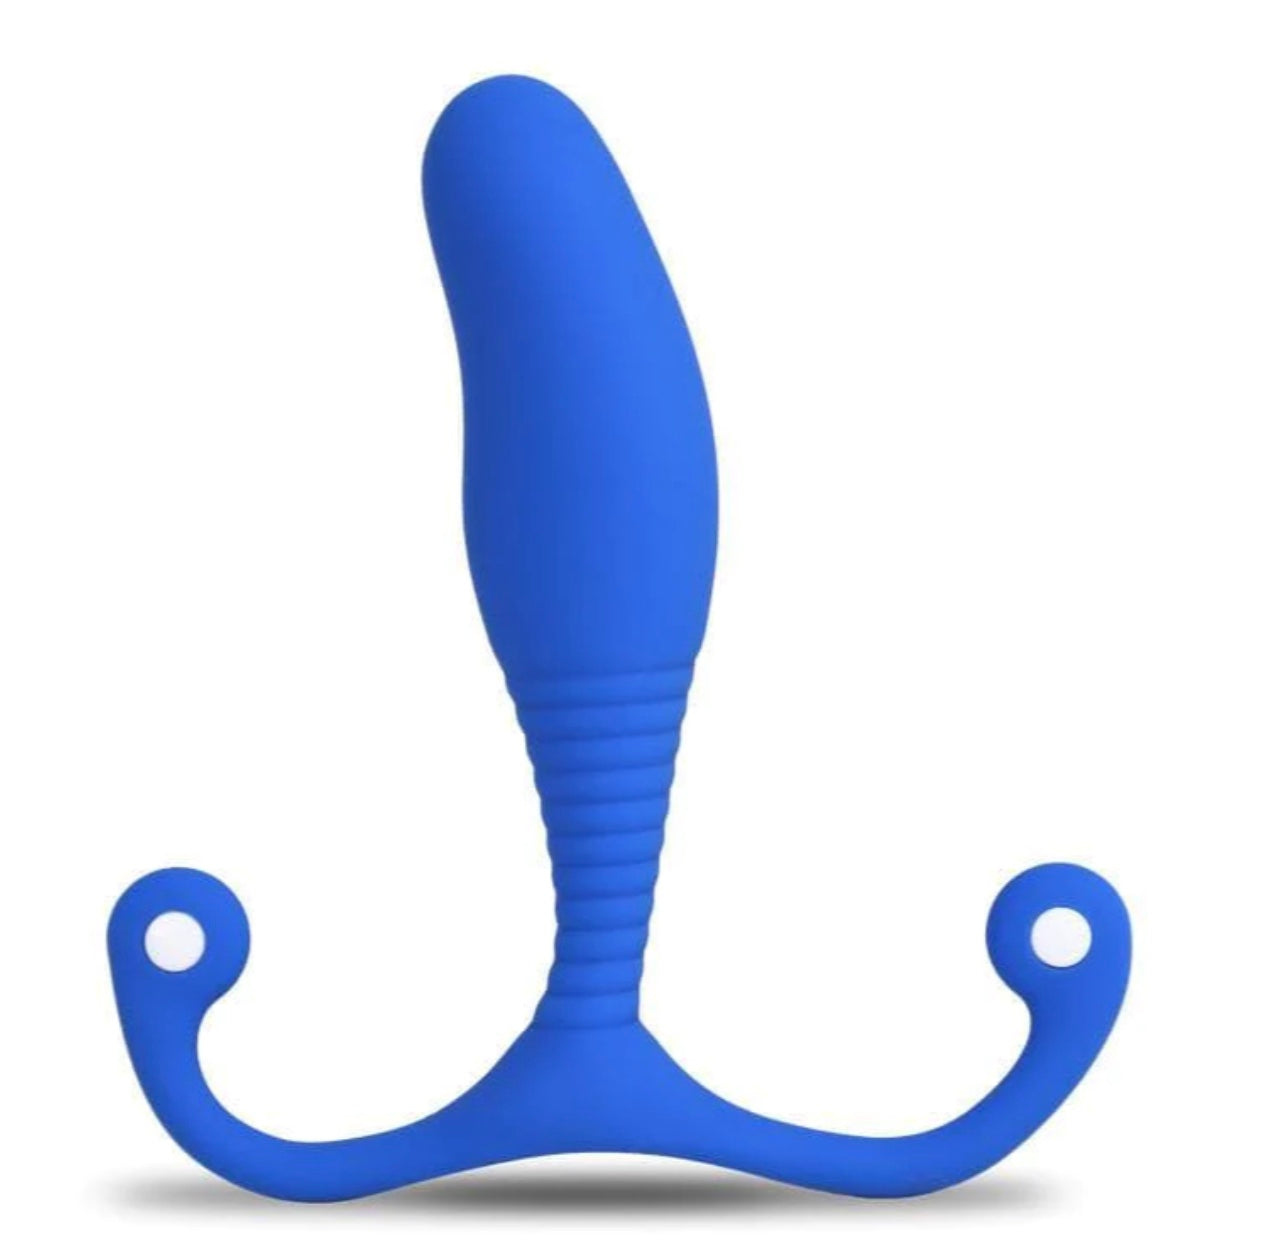 The Special Edition Blue Aneros Original Trident Prostate Massager MGX